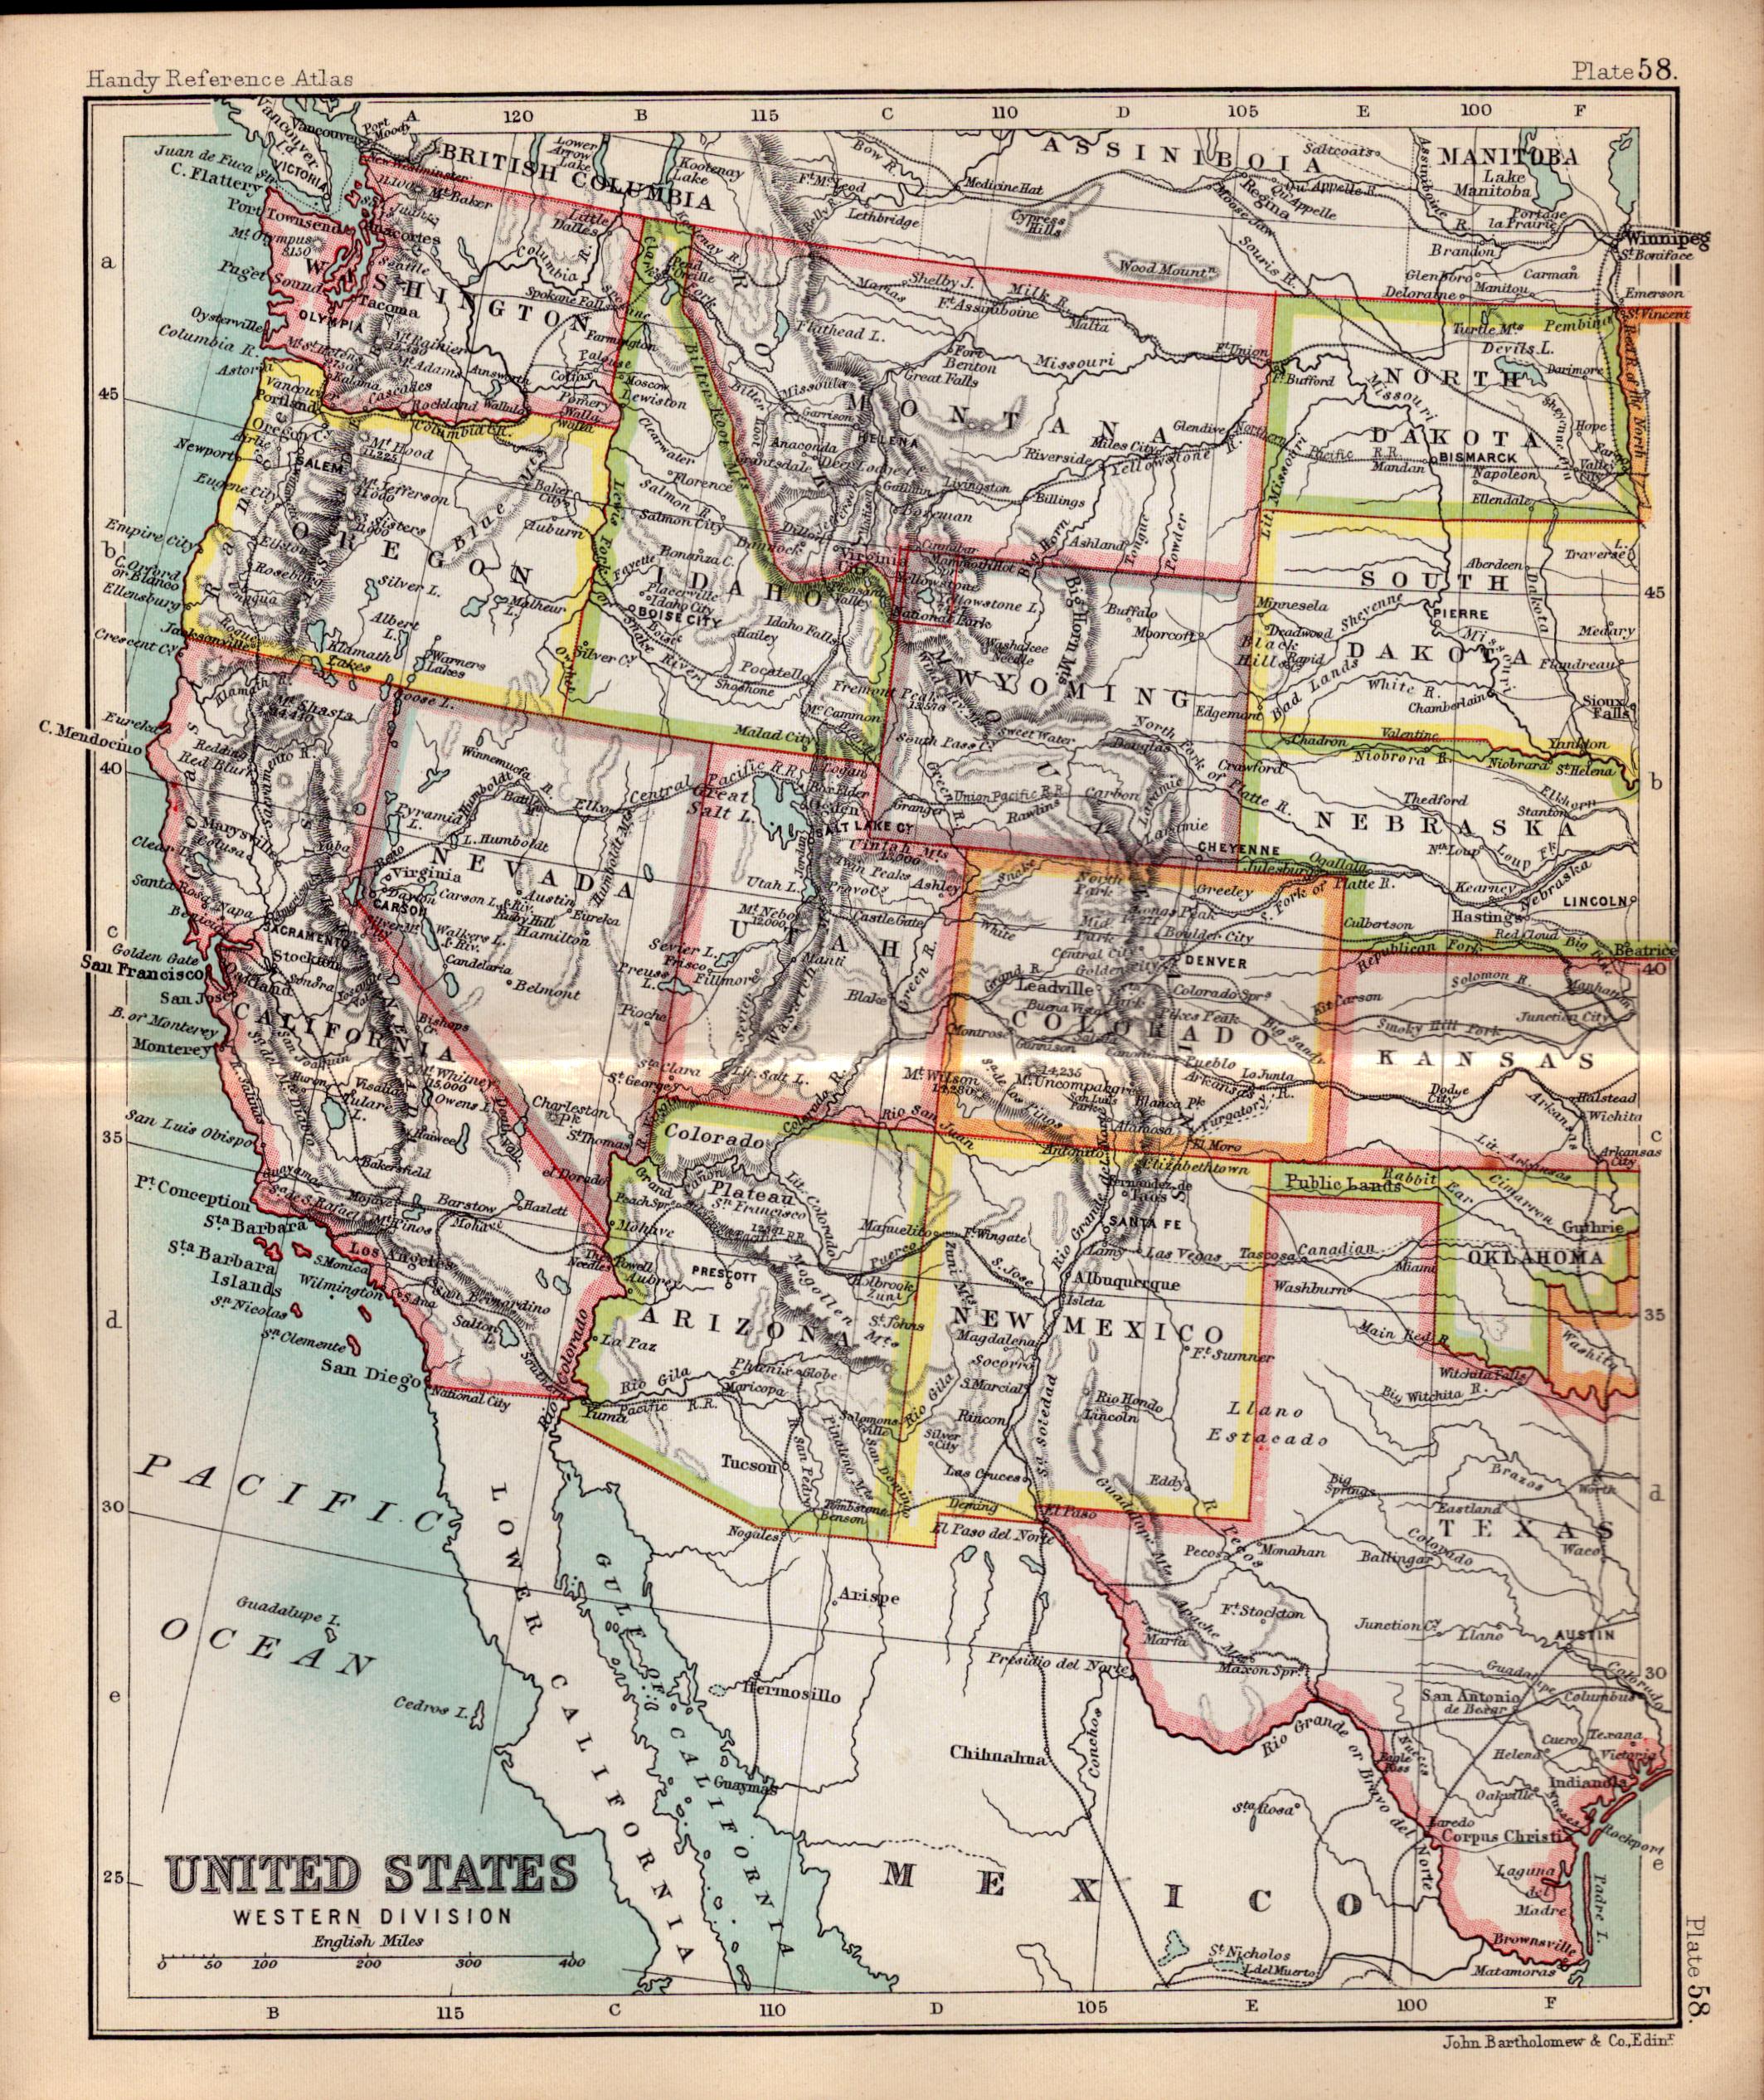 United States Western Double Sided Victorian Antique 1898 Map.